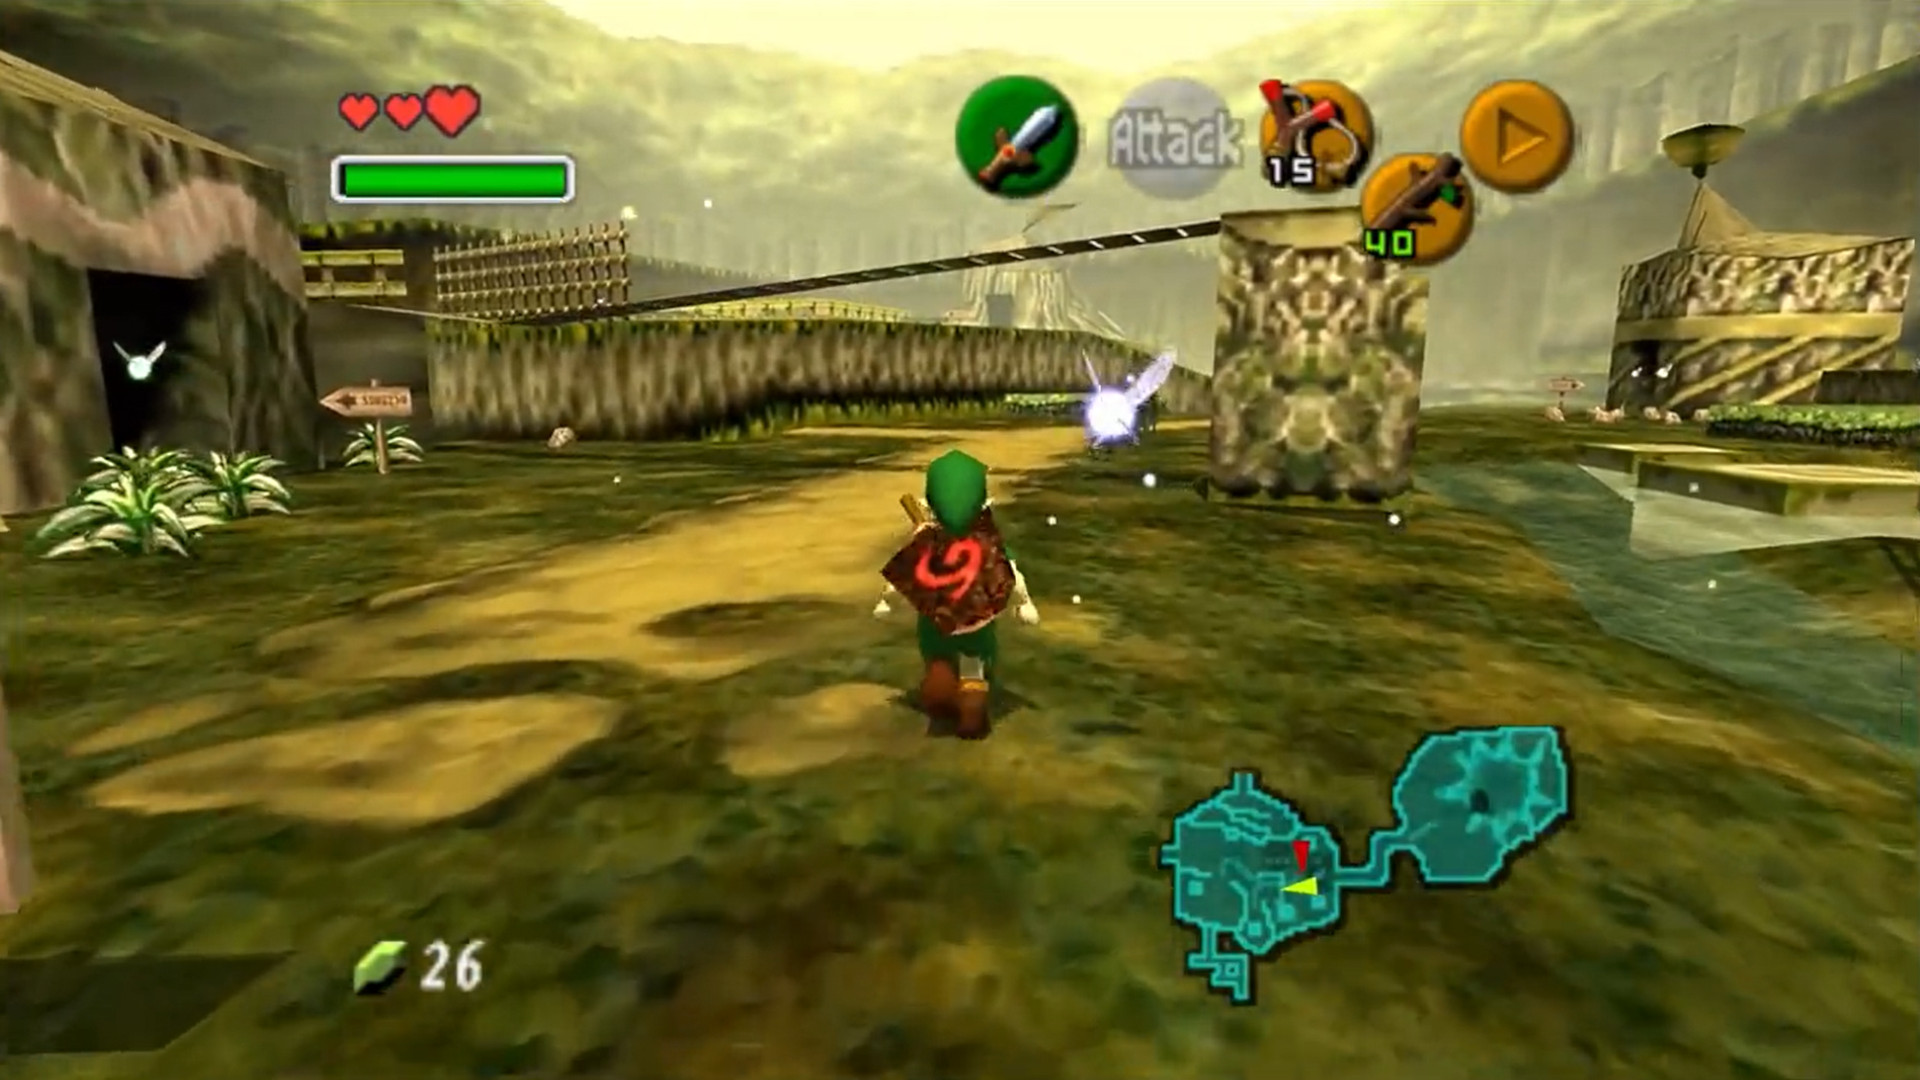 Emulator devs are bringing 60 FPS and ray tracing to N64 games like Paper Mario and Zelda: Ocarina of Time